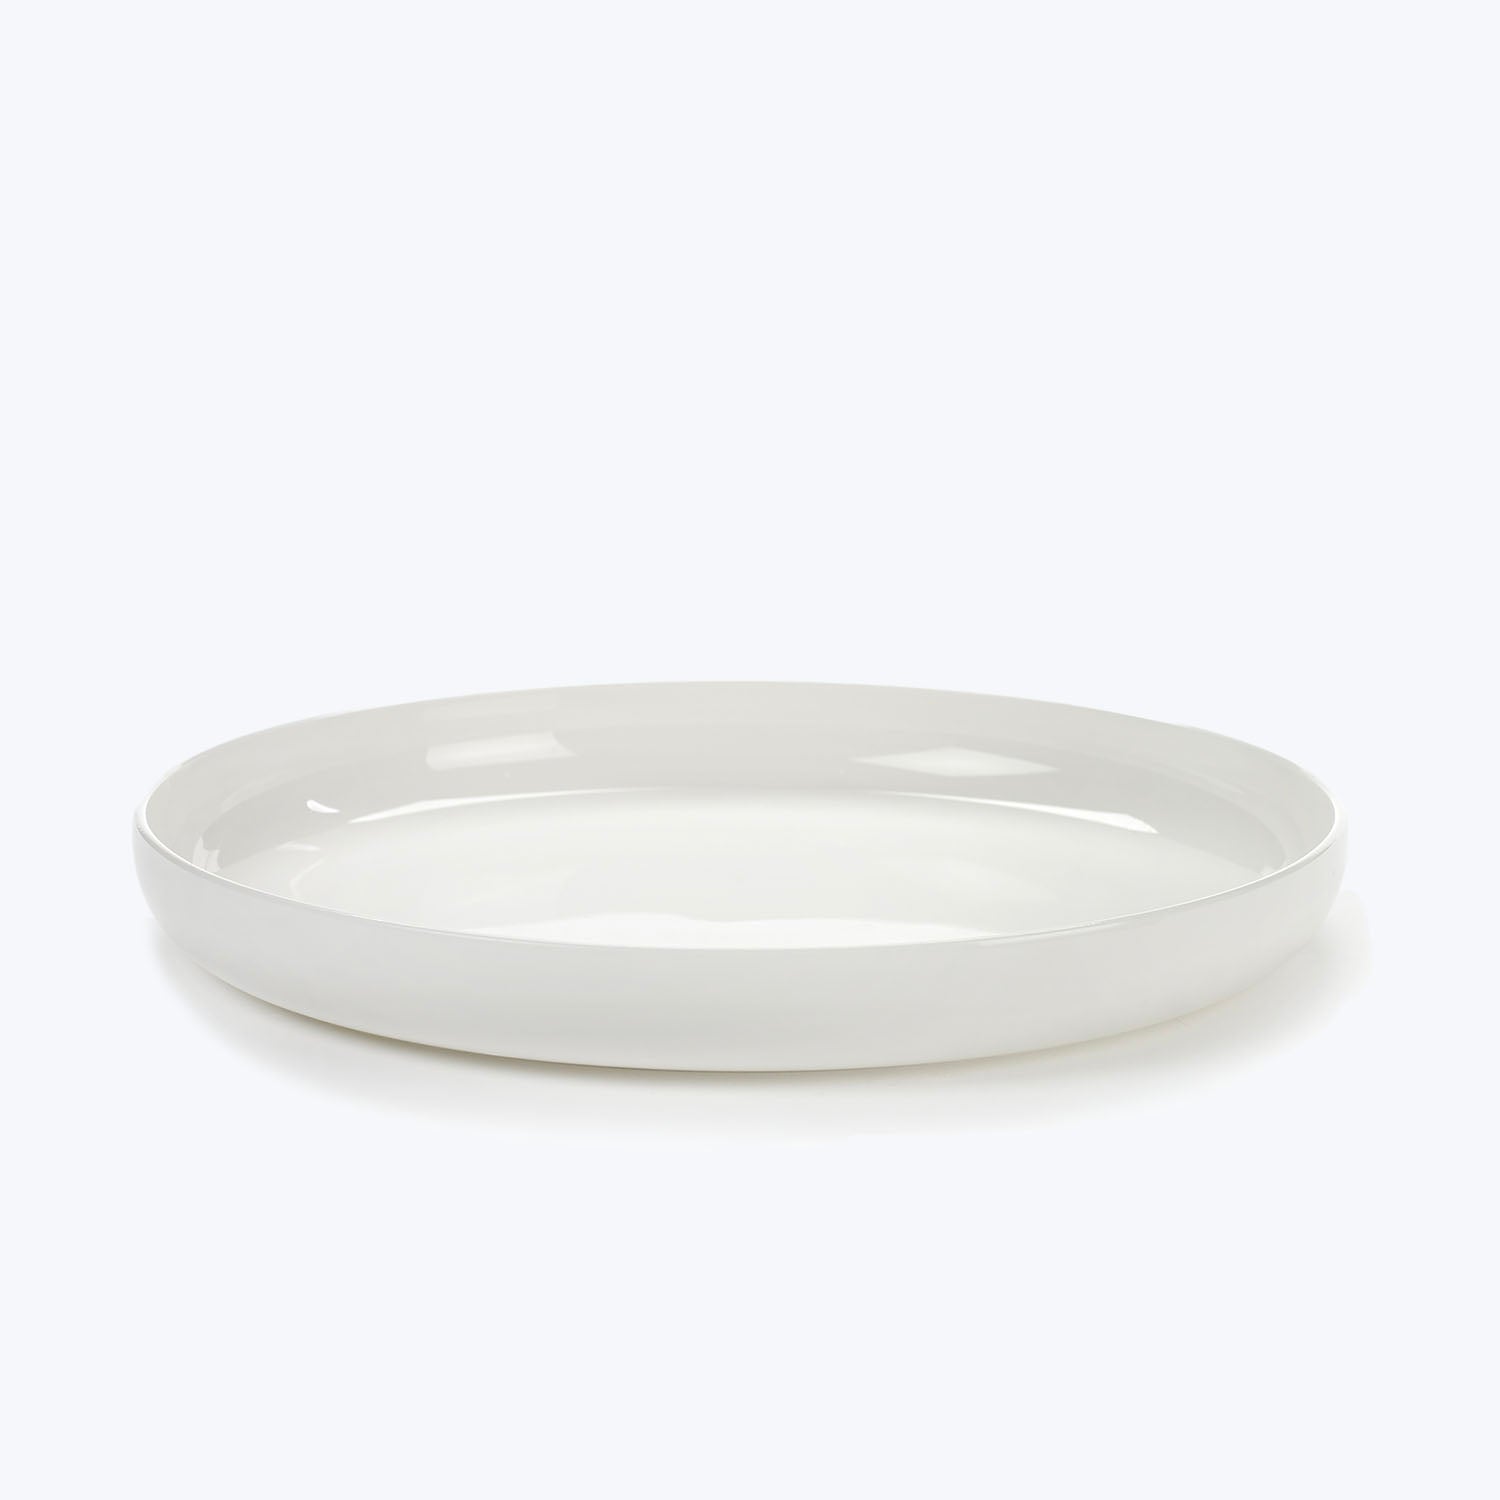 Piet Boon Base Tableware Collection Glazed White / Large Plate (Set of 4)